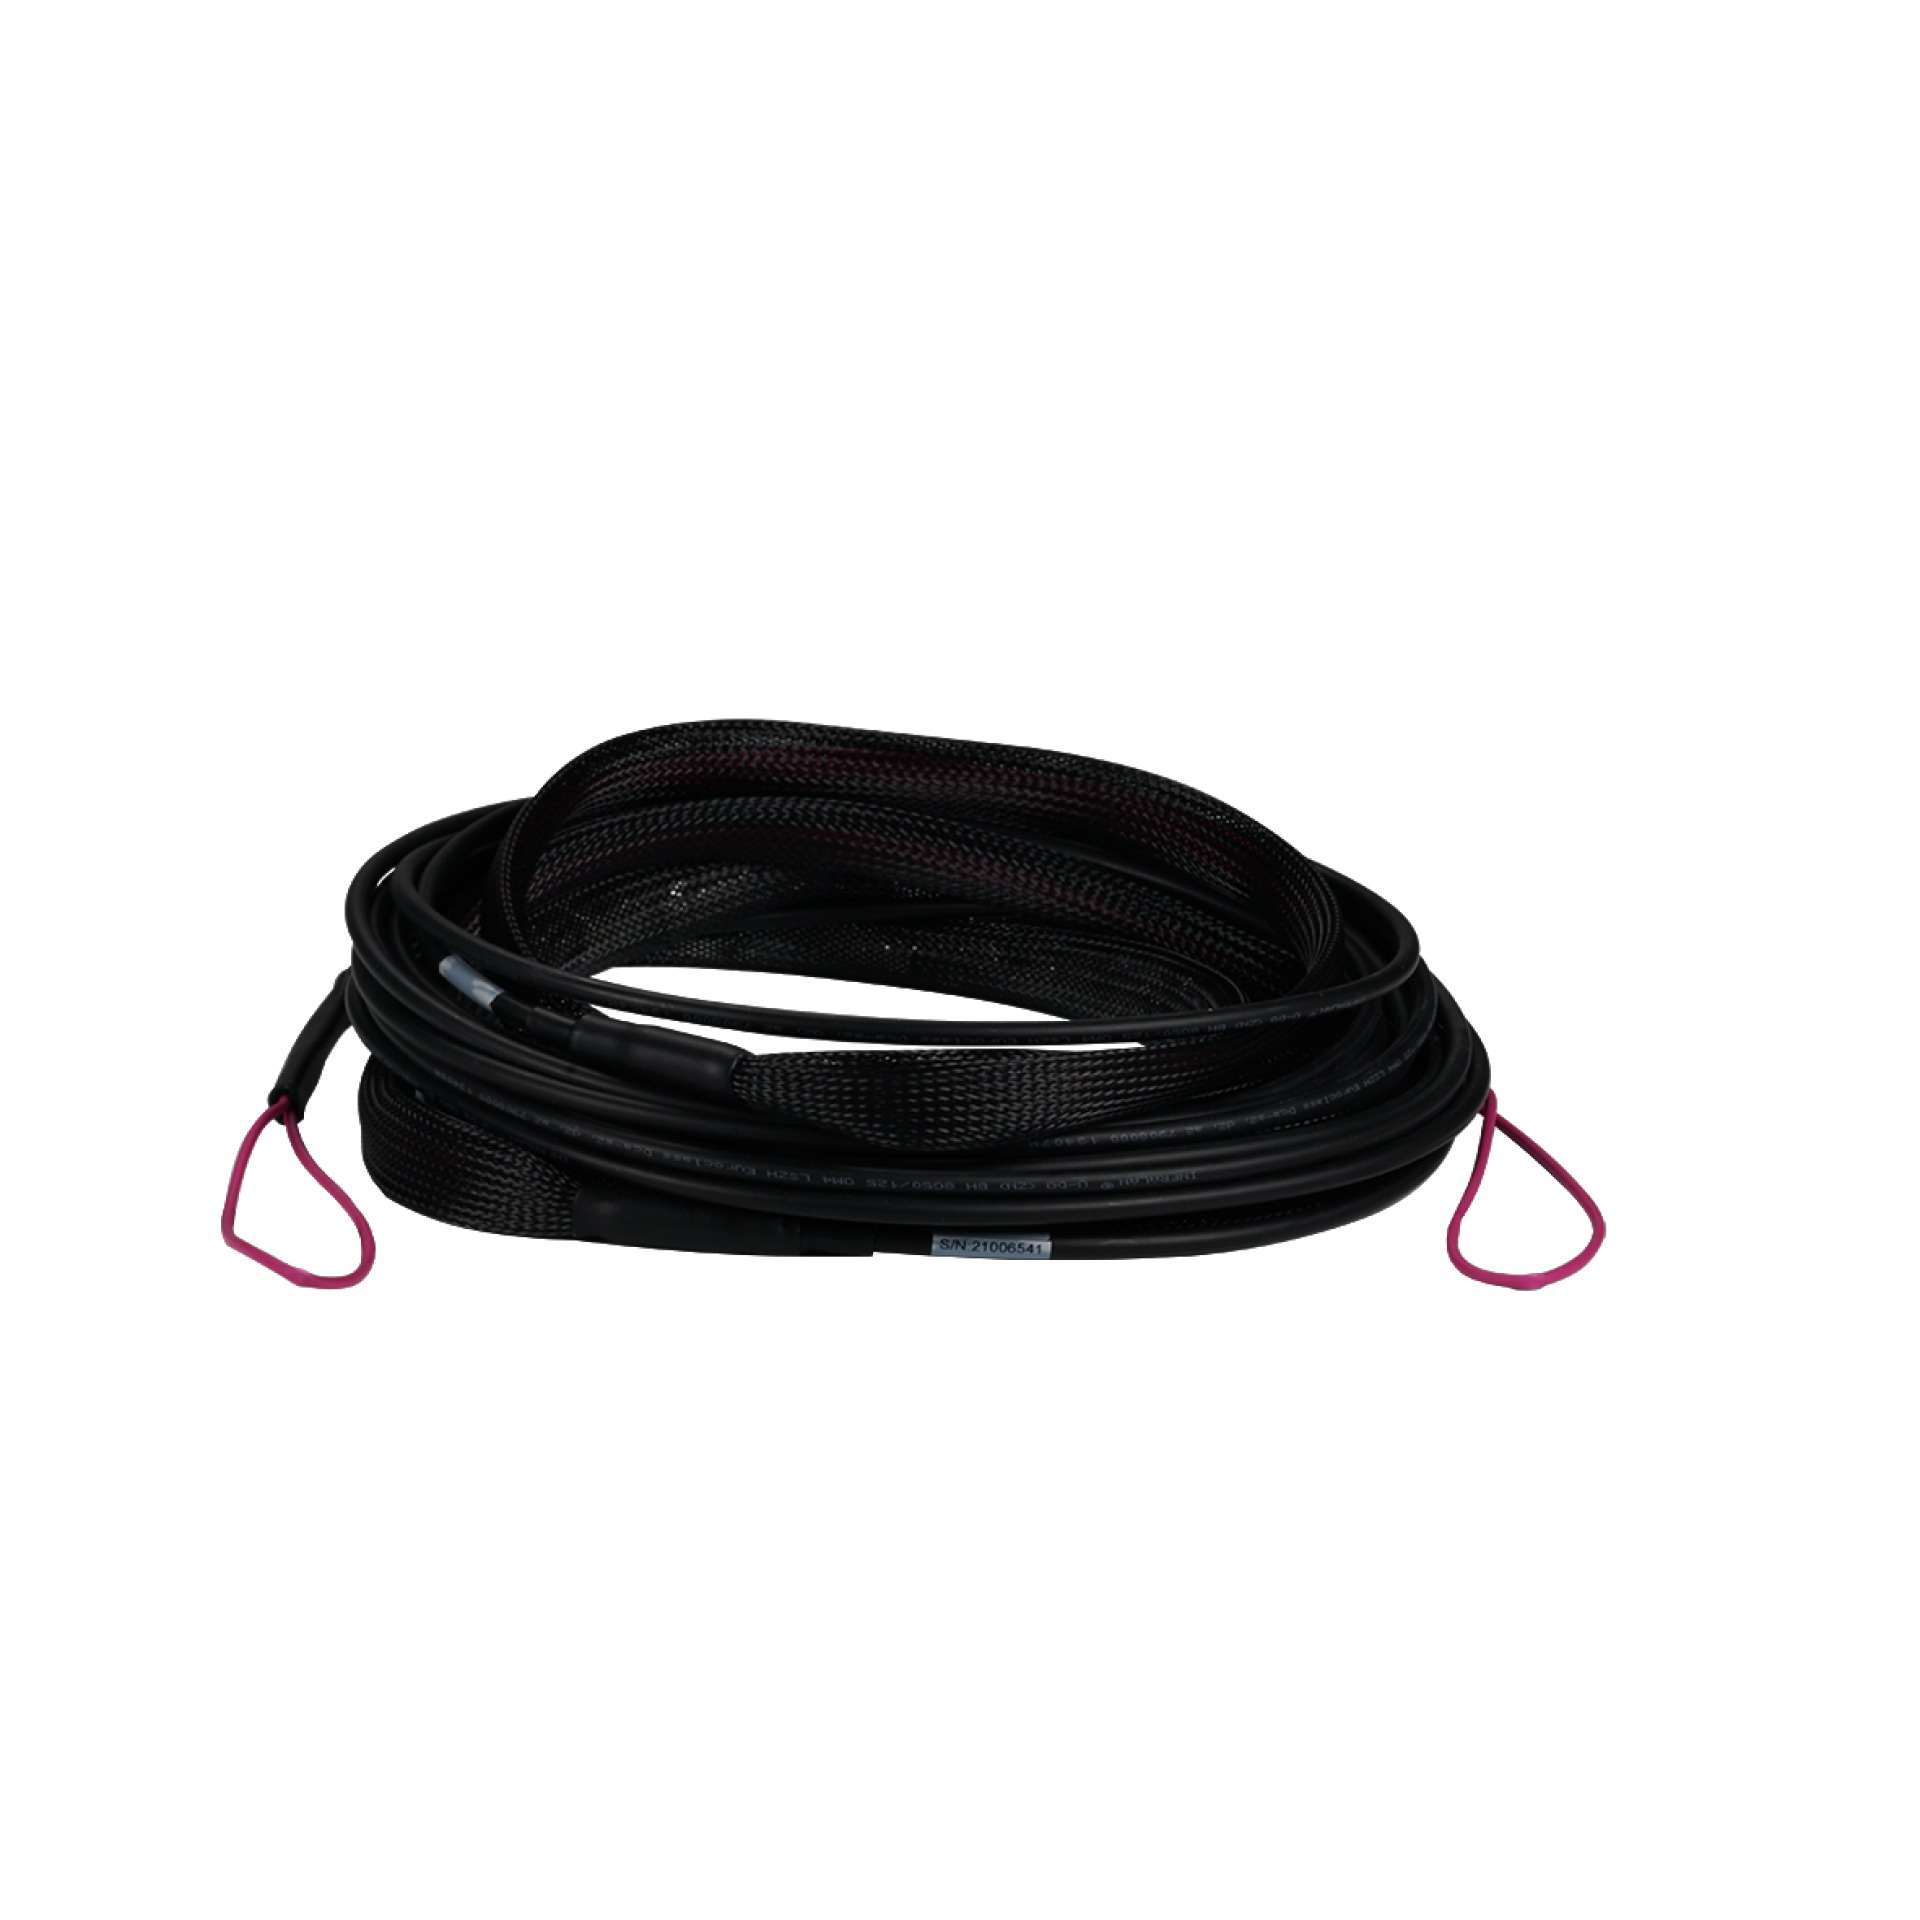 Trunk cable U-DQ(ZN)BH 12G 50/125, SC/SC OM4 170m